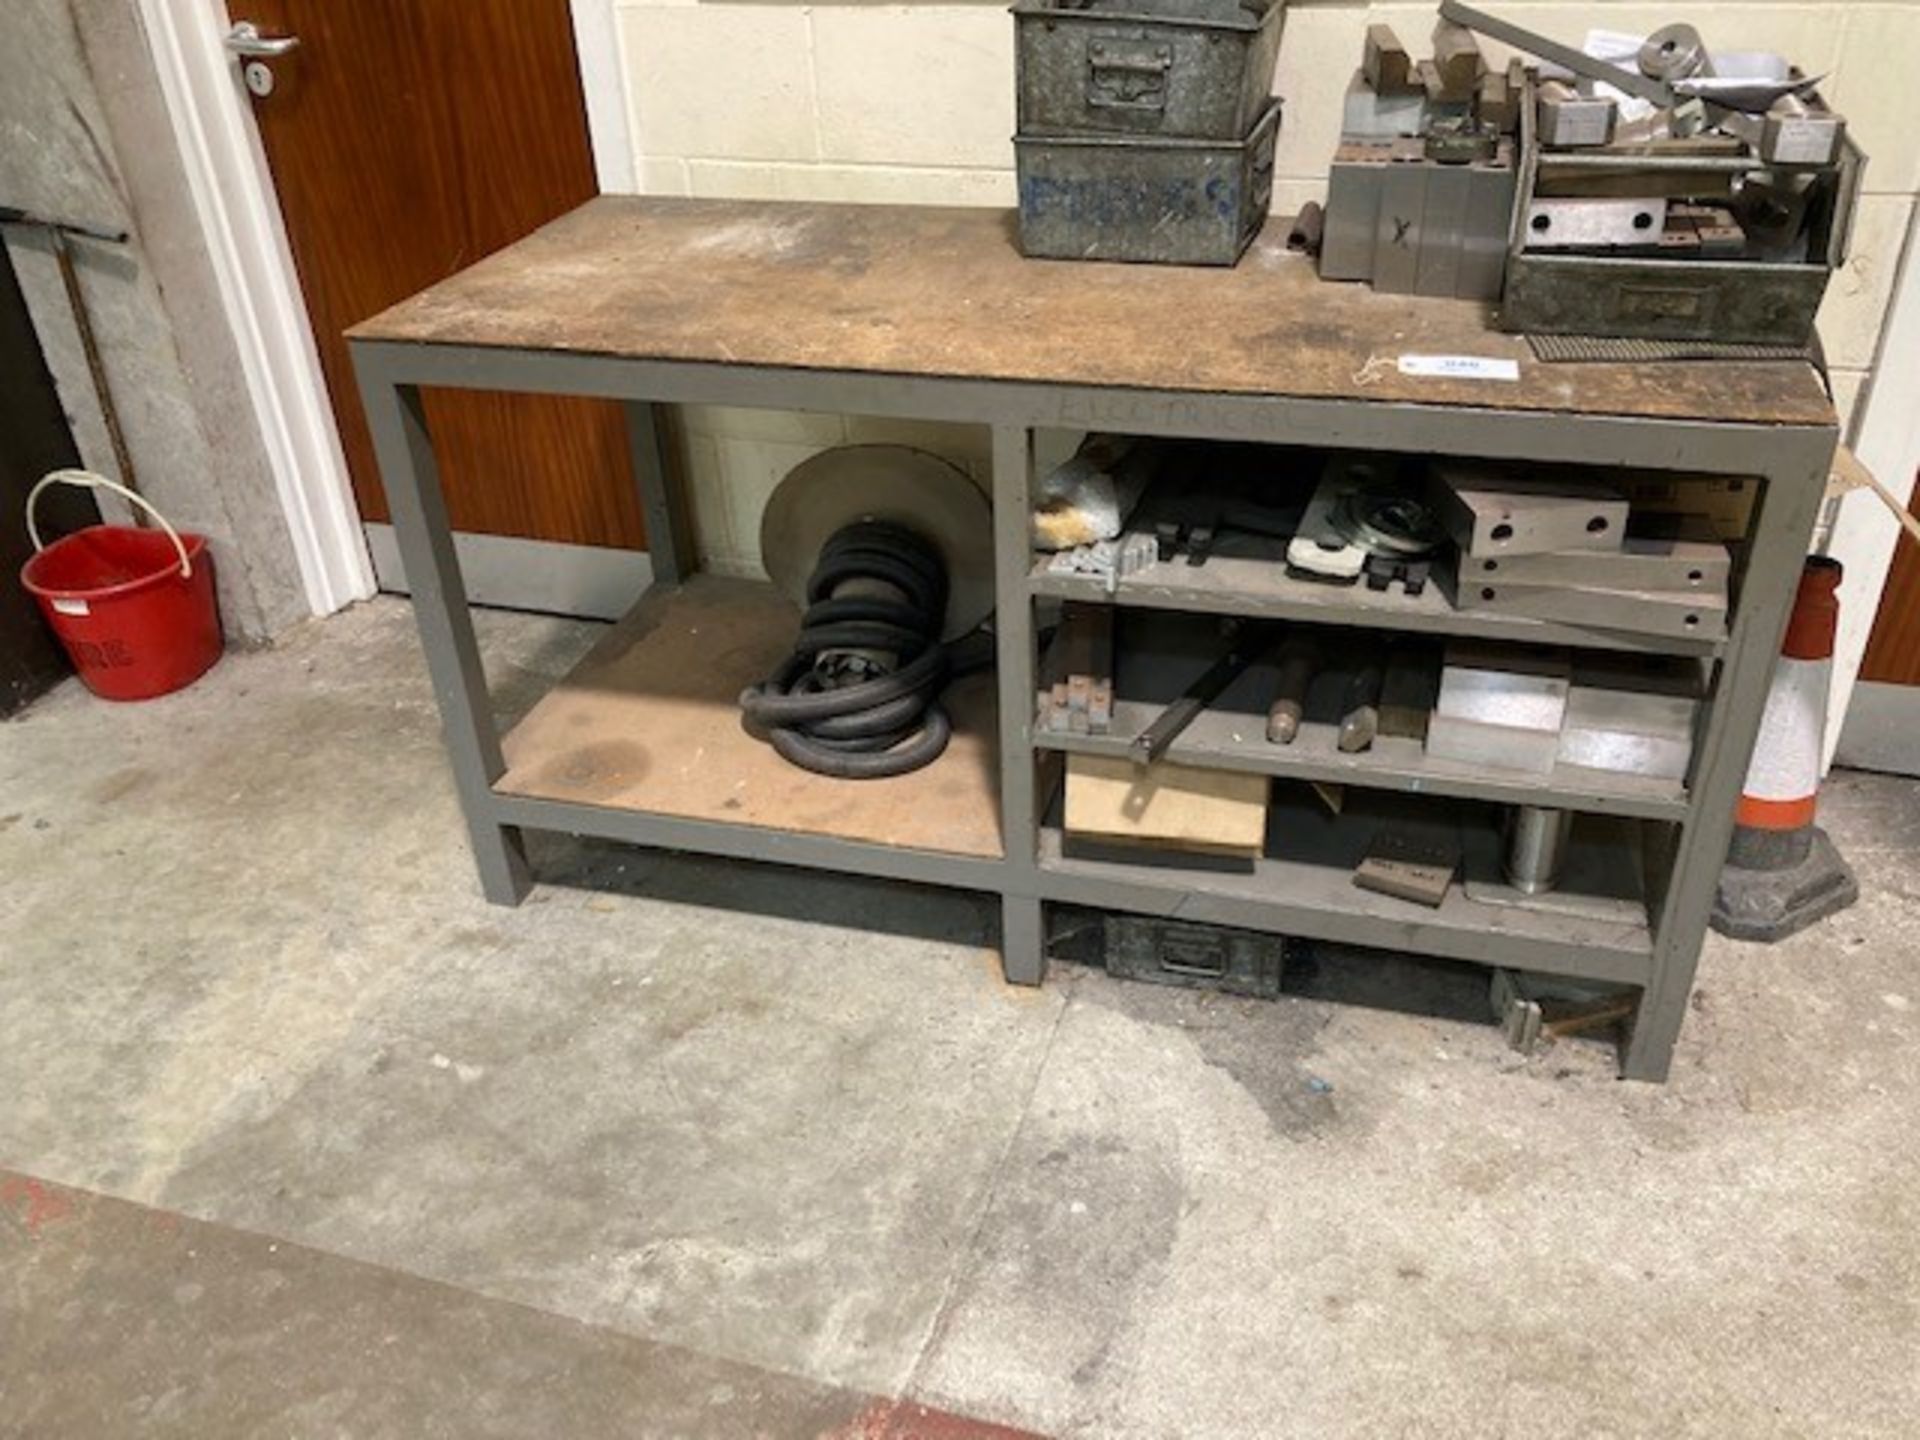 Two Tier Steel Workbench & Contents